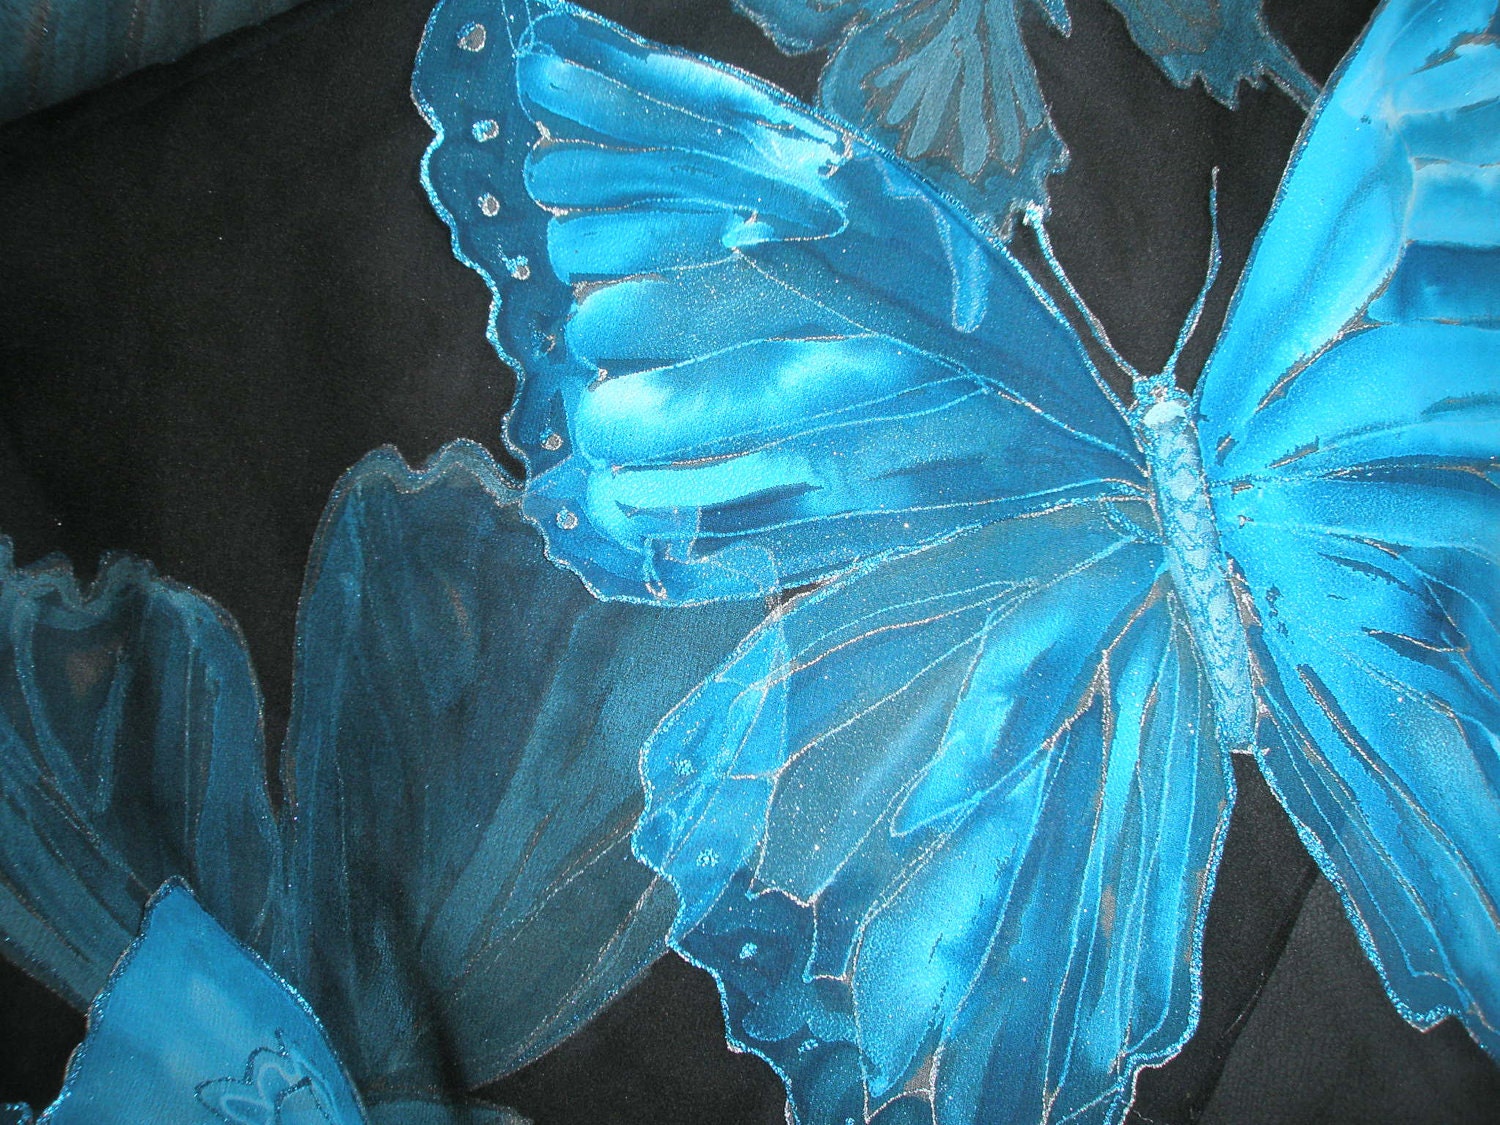 Made to order hand painted silk scarf with turquoise morpho butterflies. Blue, black and silver magic silk chiffon scarf